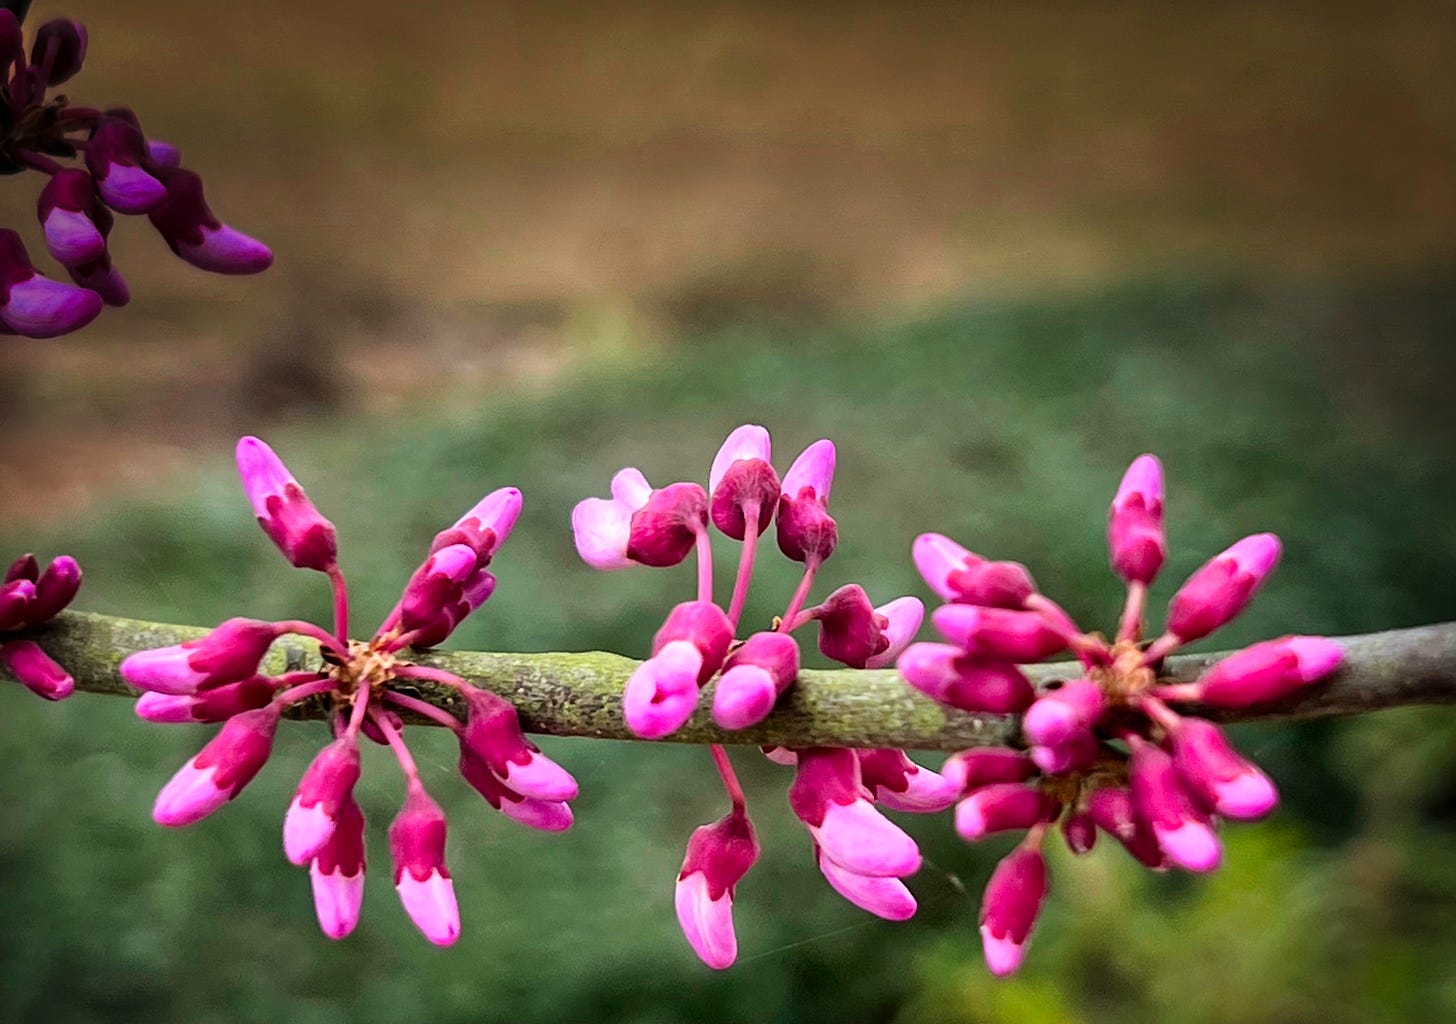 Closeup view of the pink blossoms of the Red Bud Tree with a burred background